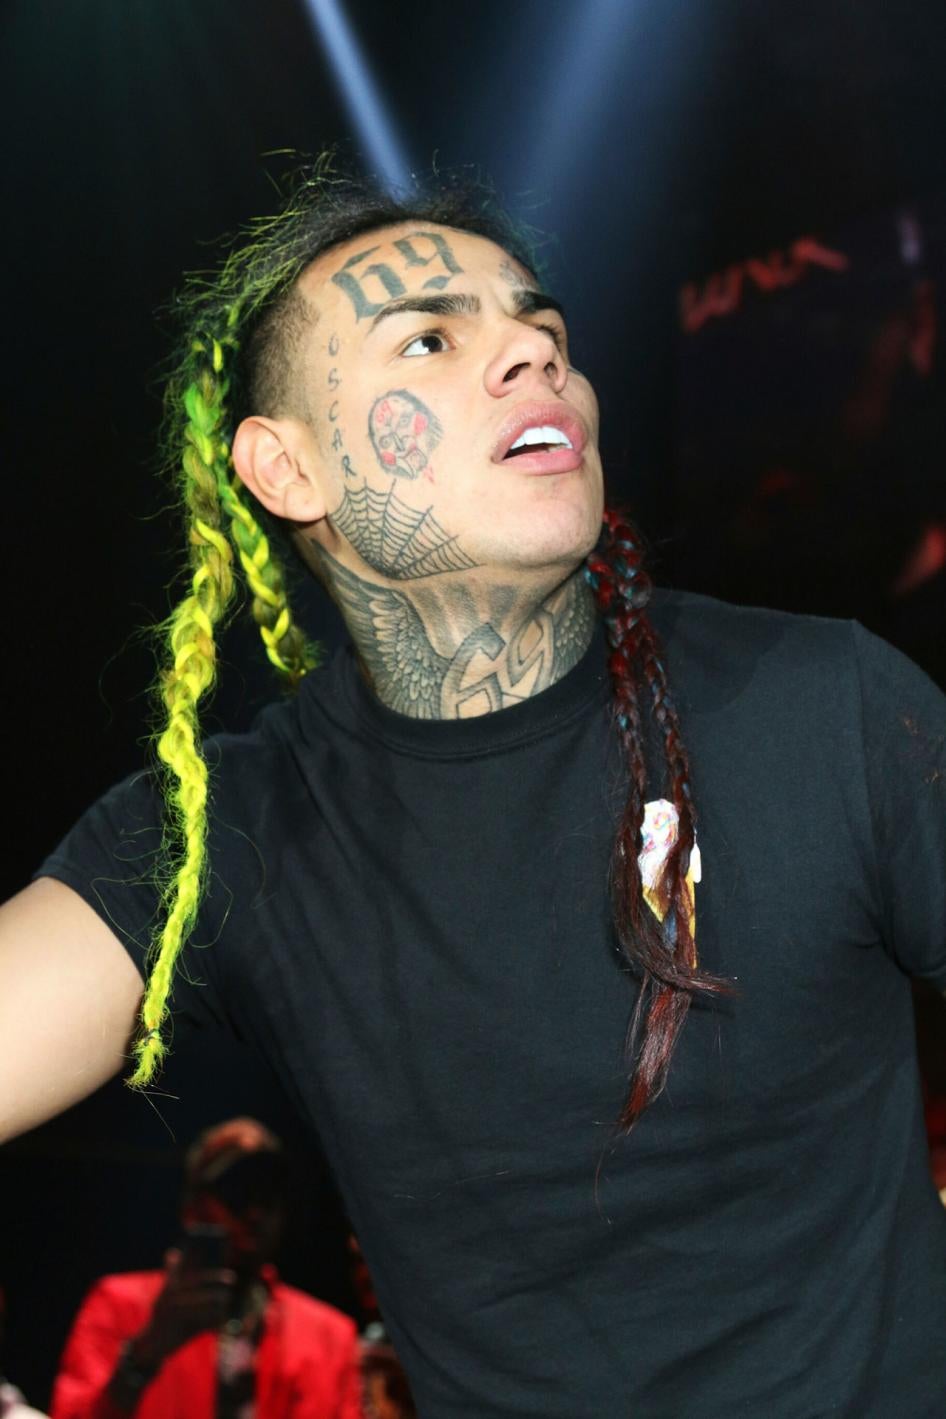 Daniel Hernandez, also known as the New York-based musician 6ix9ine performs at the Prudential Center in Newark, New Jersey, October 28, 2018.